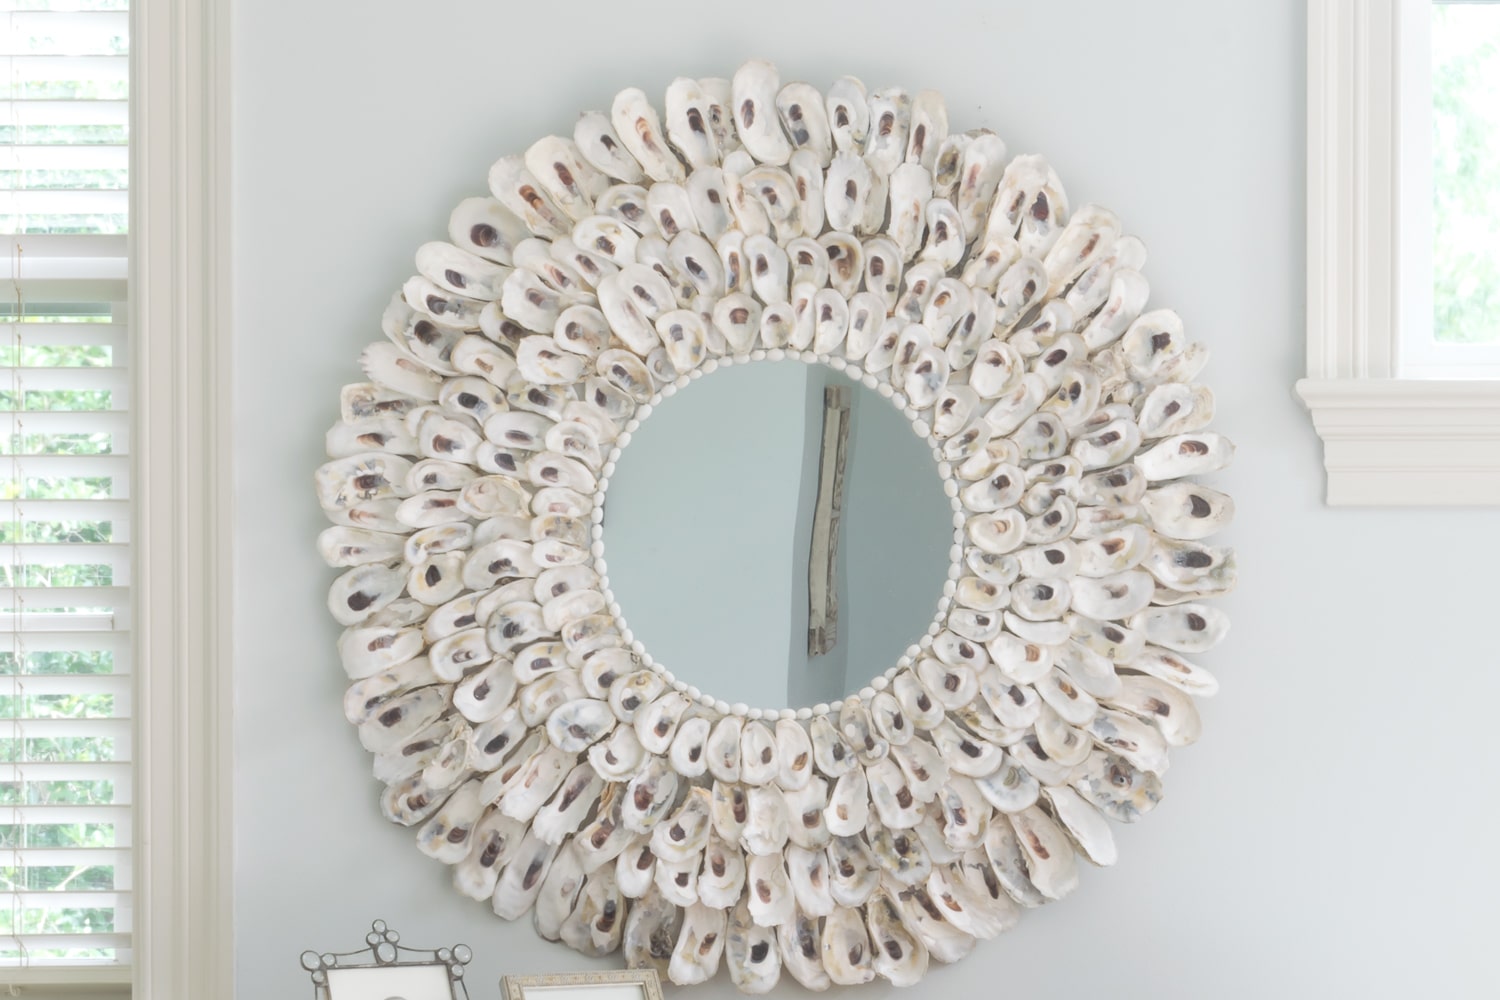 oyster shell mirror